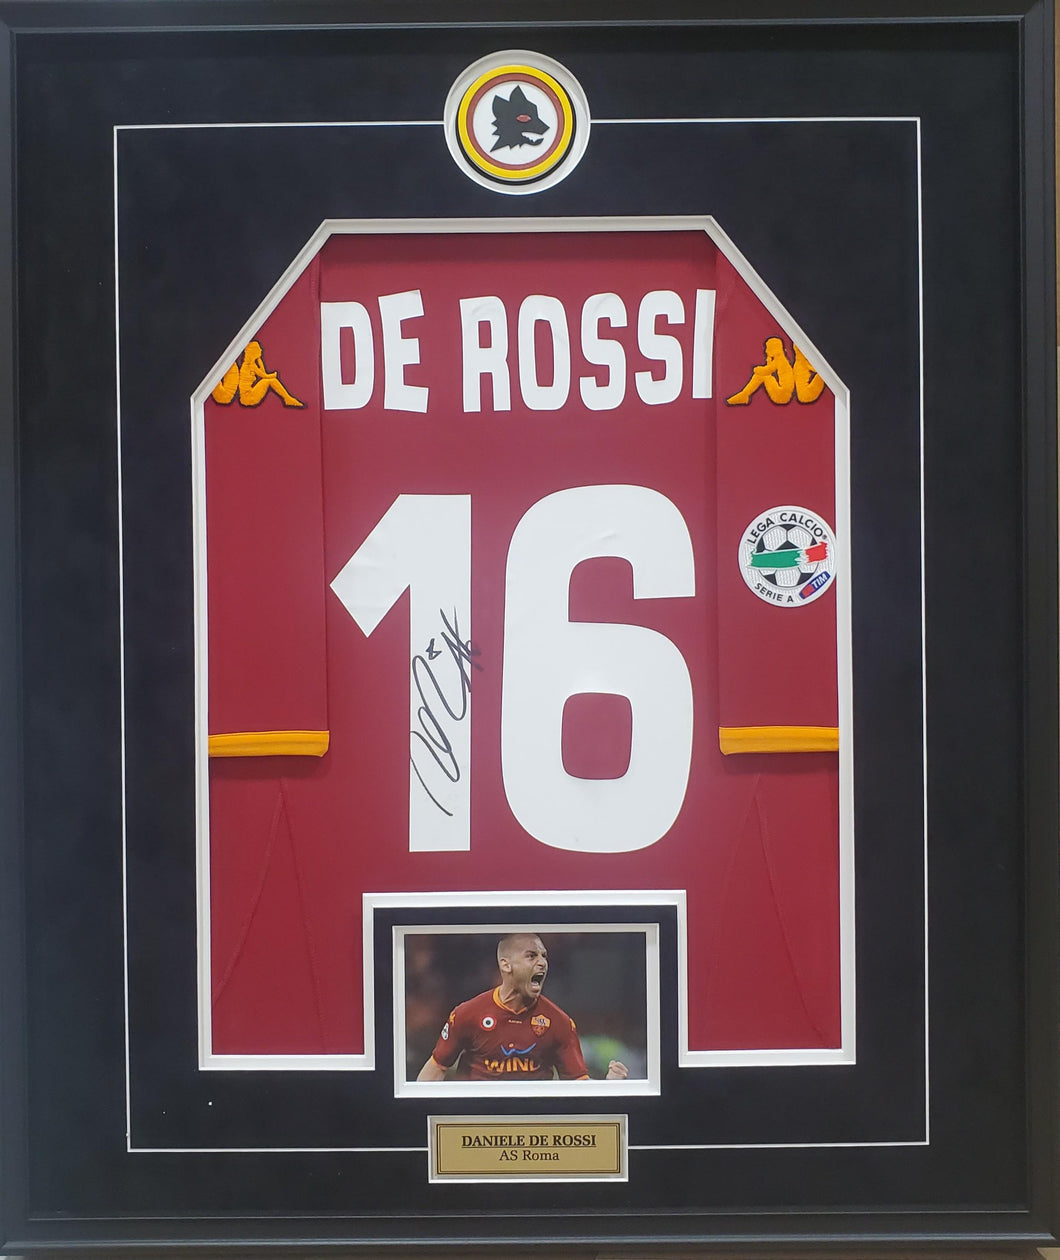 De Rossi Authentic 2007/08 Signed & Framed Roma Jersey